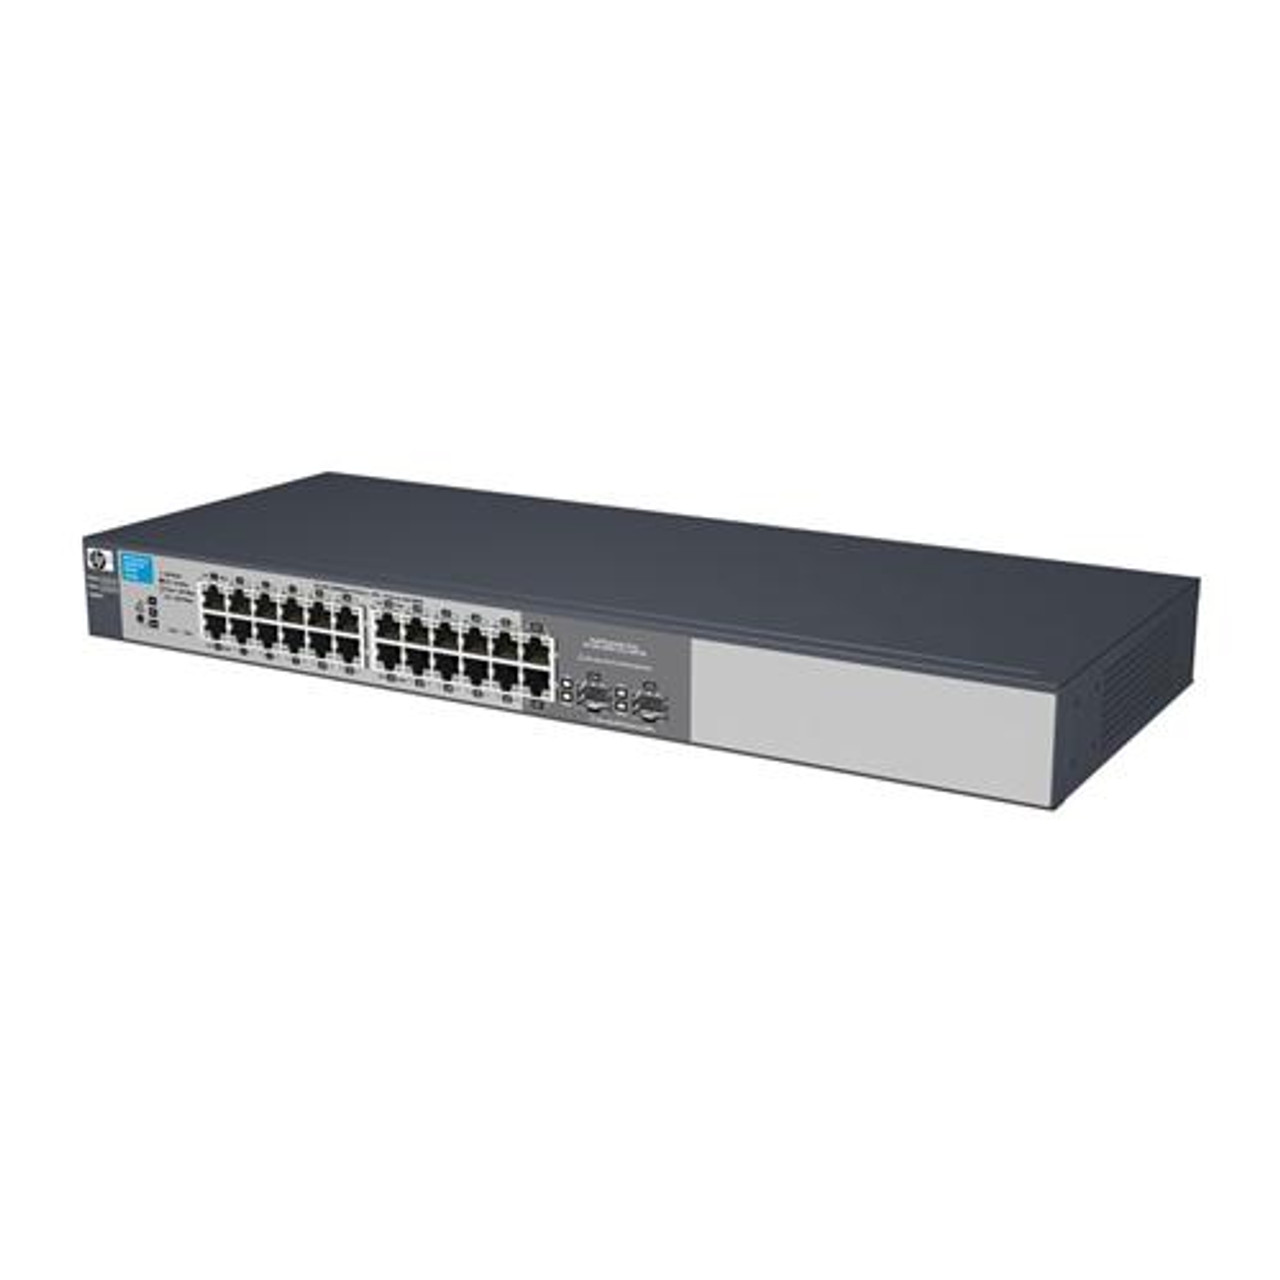 J9450A3FOR2 HP Procurve 1810-24G 24-Ports 10/100/1000Base-T RJ-45 Manageable Layer2 Rack-mountable Ethernet Switch with 2x Shared SFP (mini-GBIC) Ports